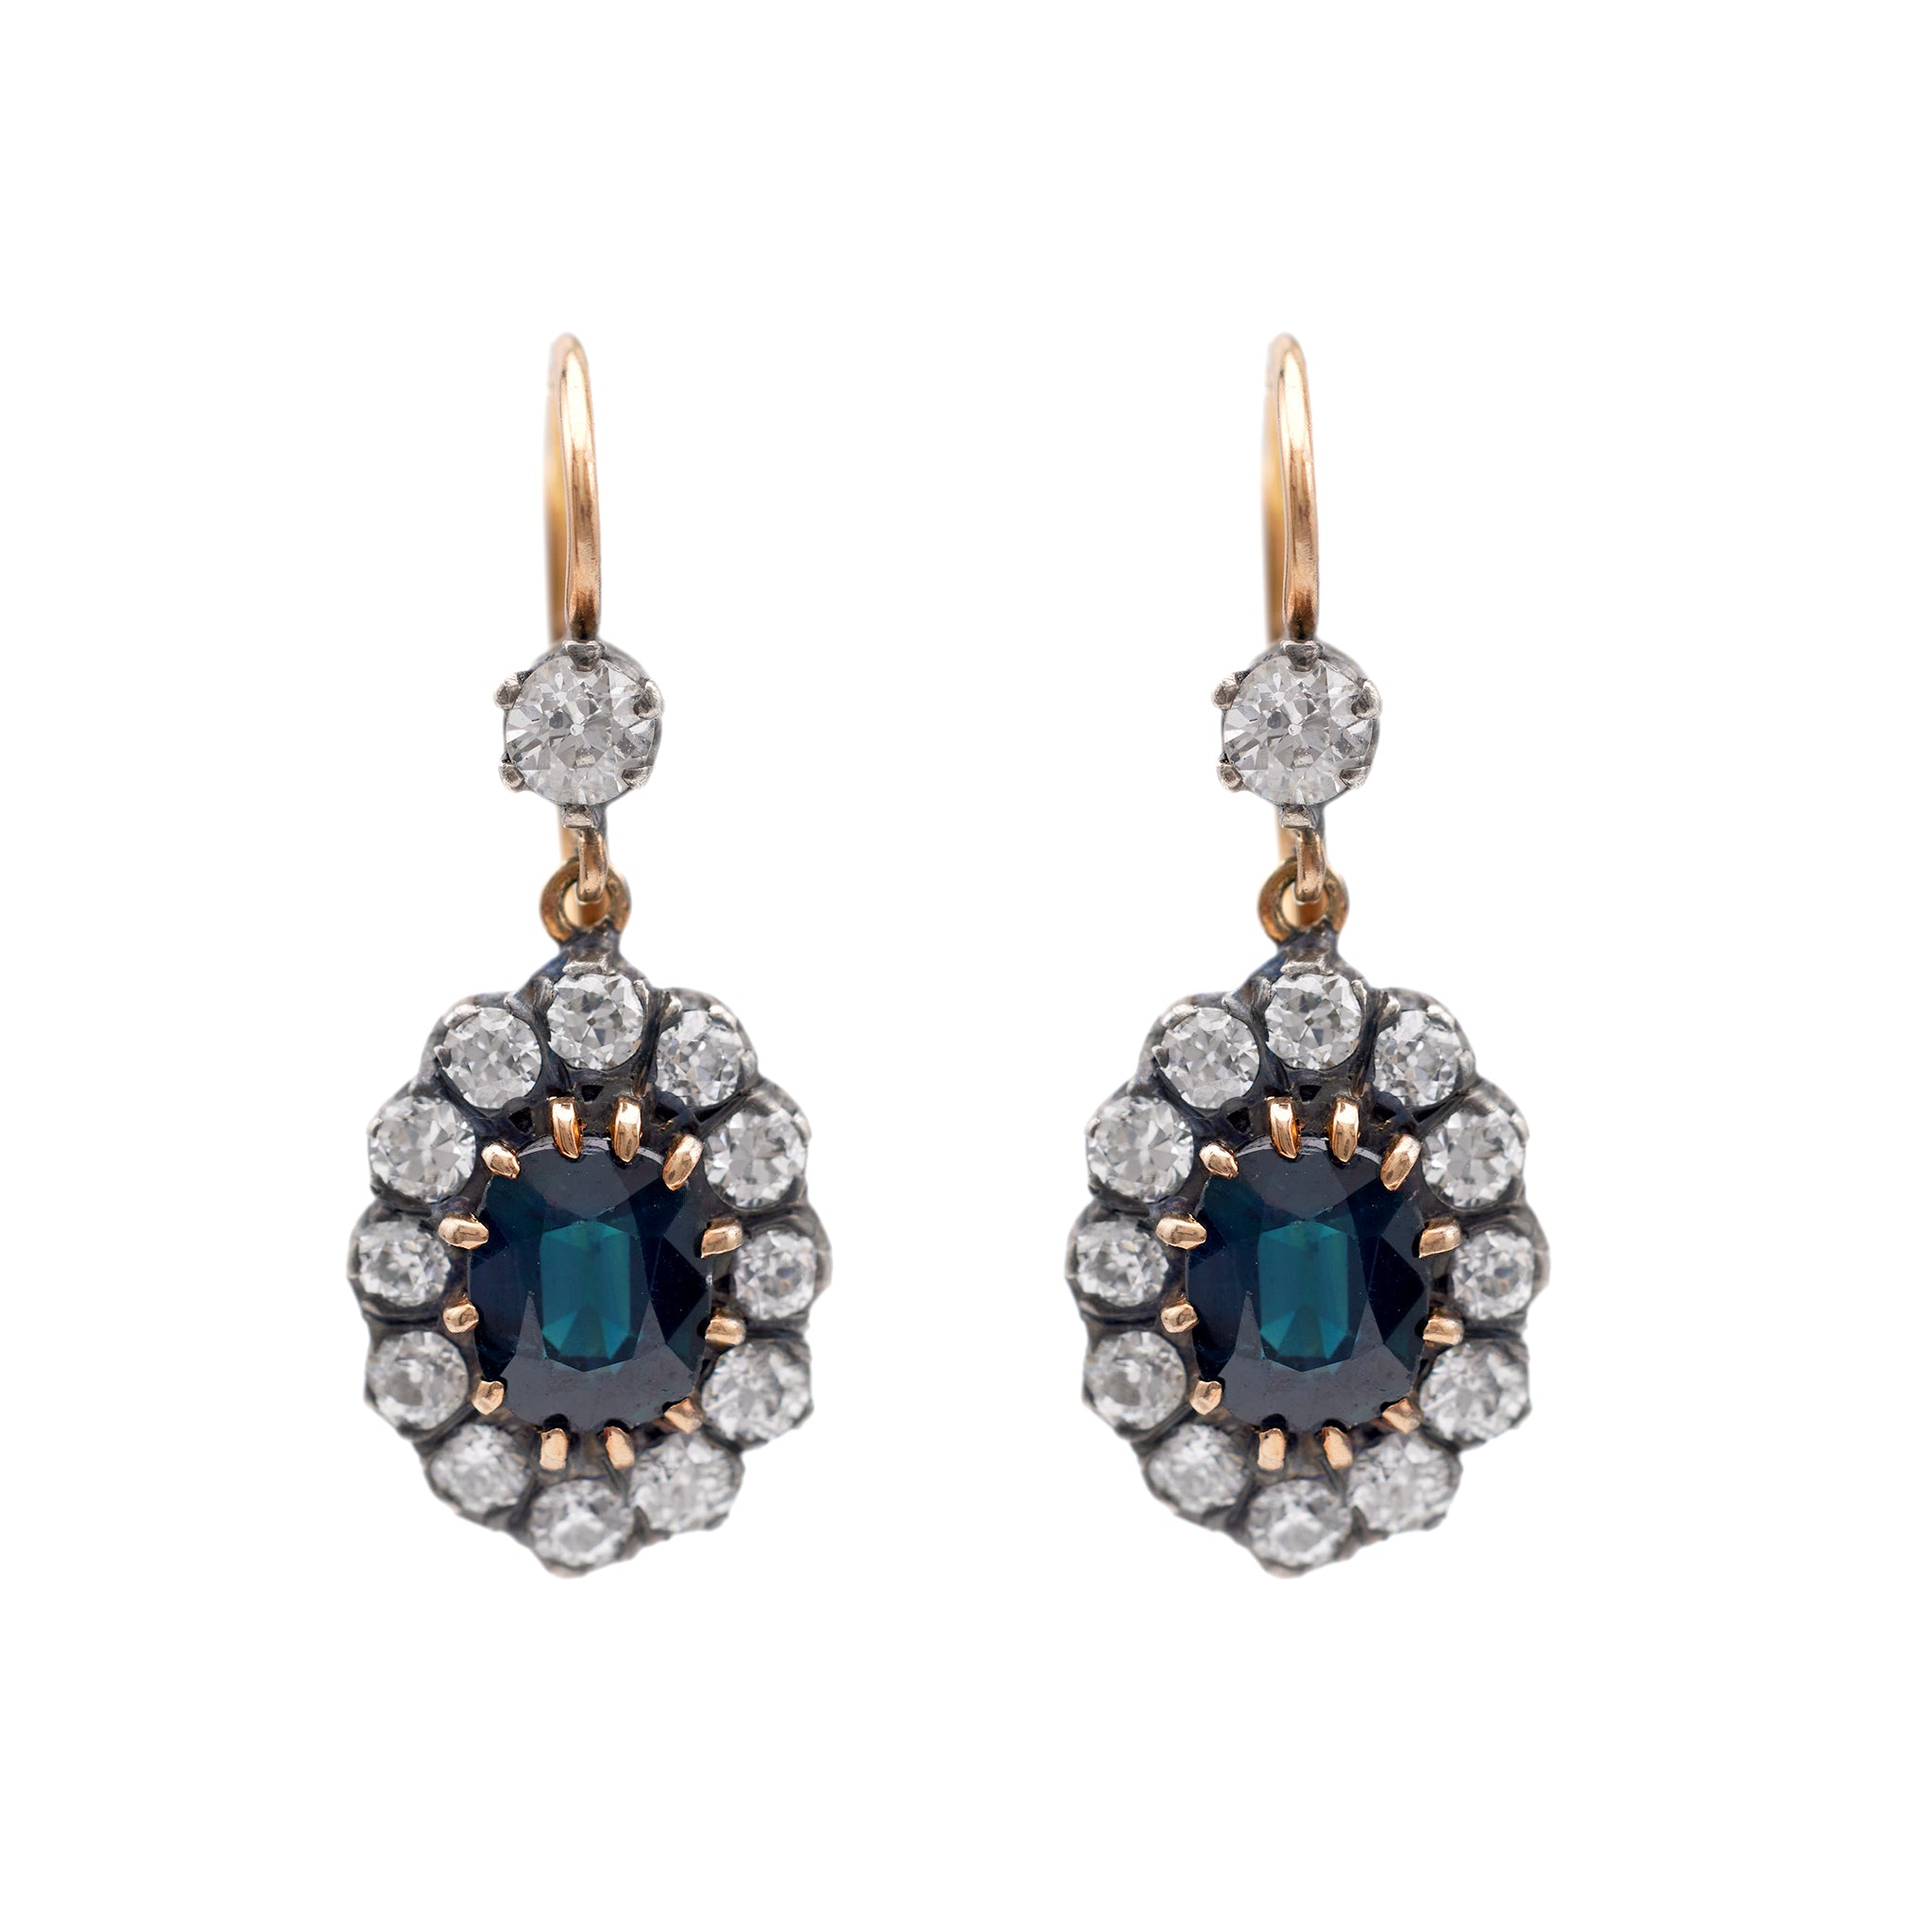 Pair of Antique Inspired Sapphire Diamond 18k Yellow Gold Silver Cluster Drop Earrings Earrings Jack Weir & Sons   